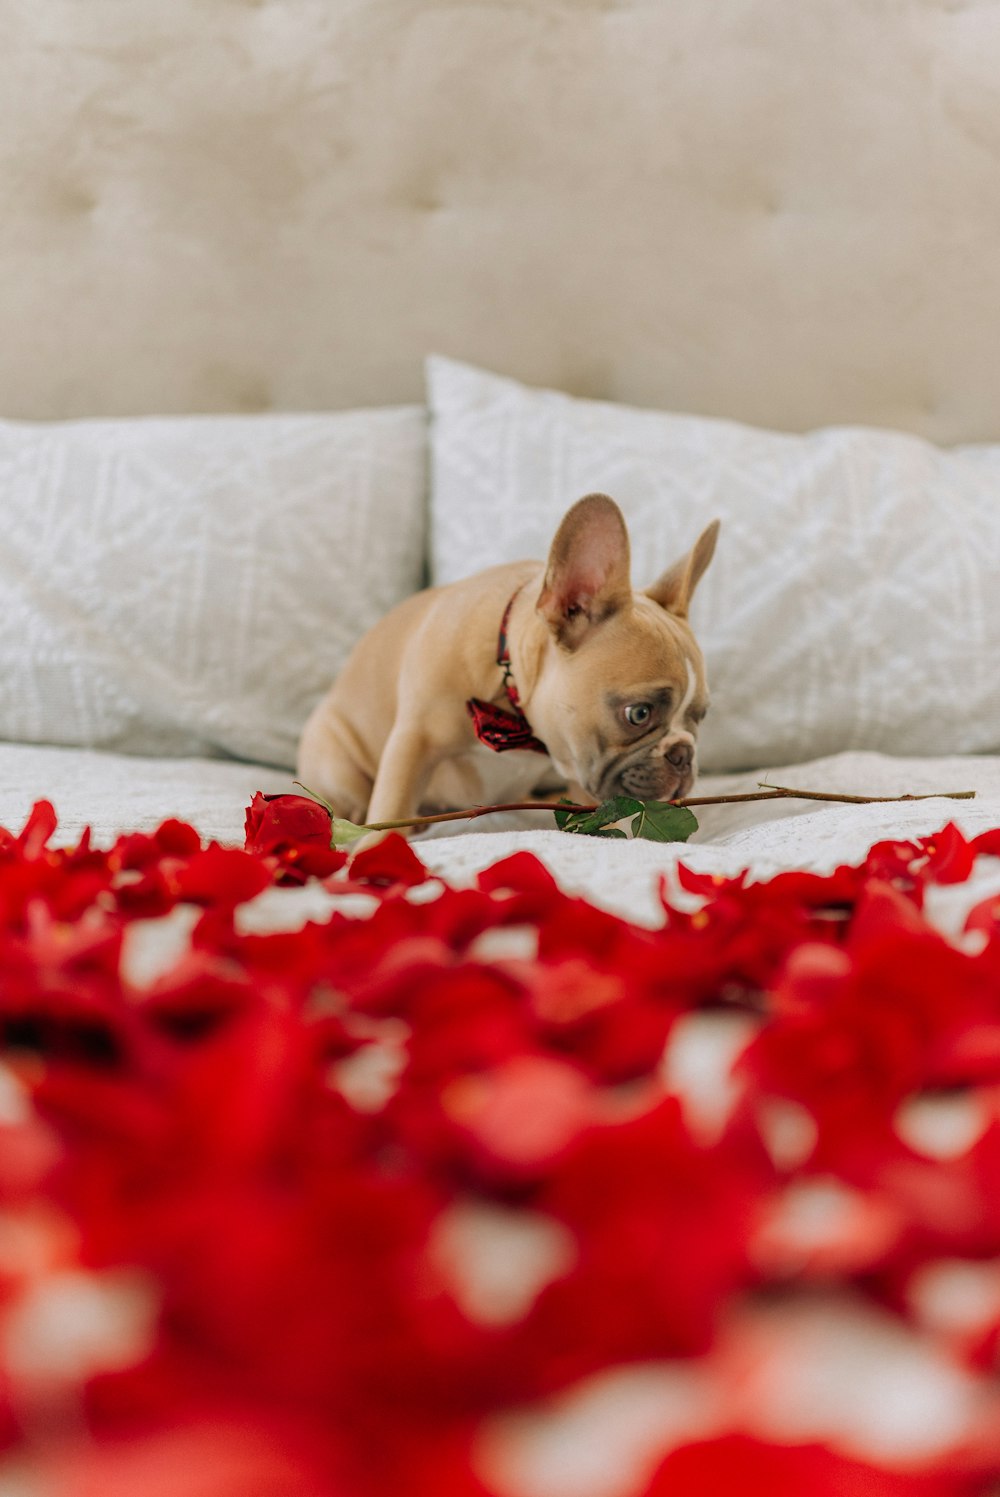 fawn pug lying on red and white floral textile